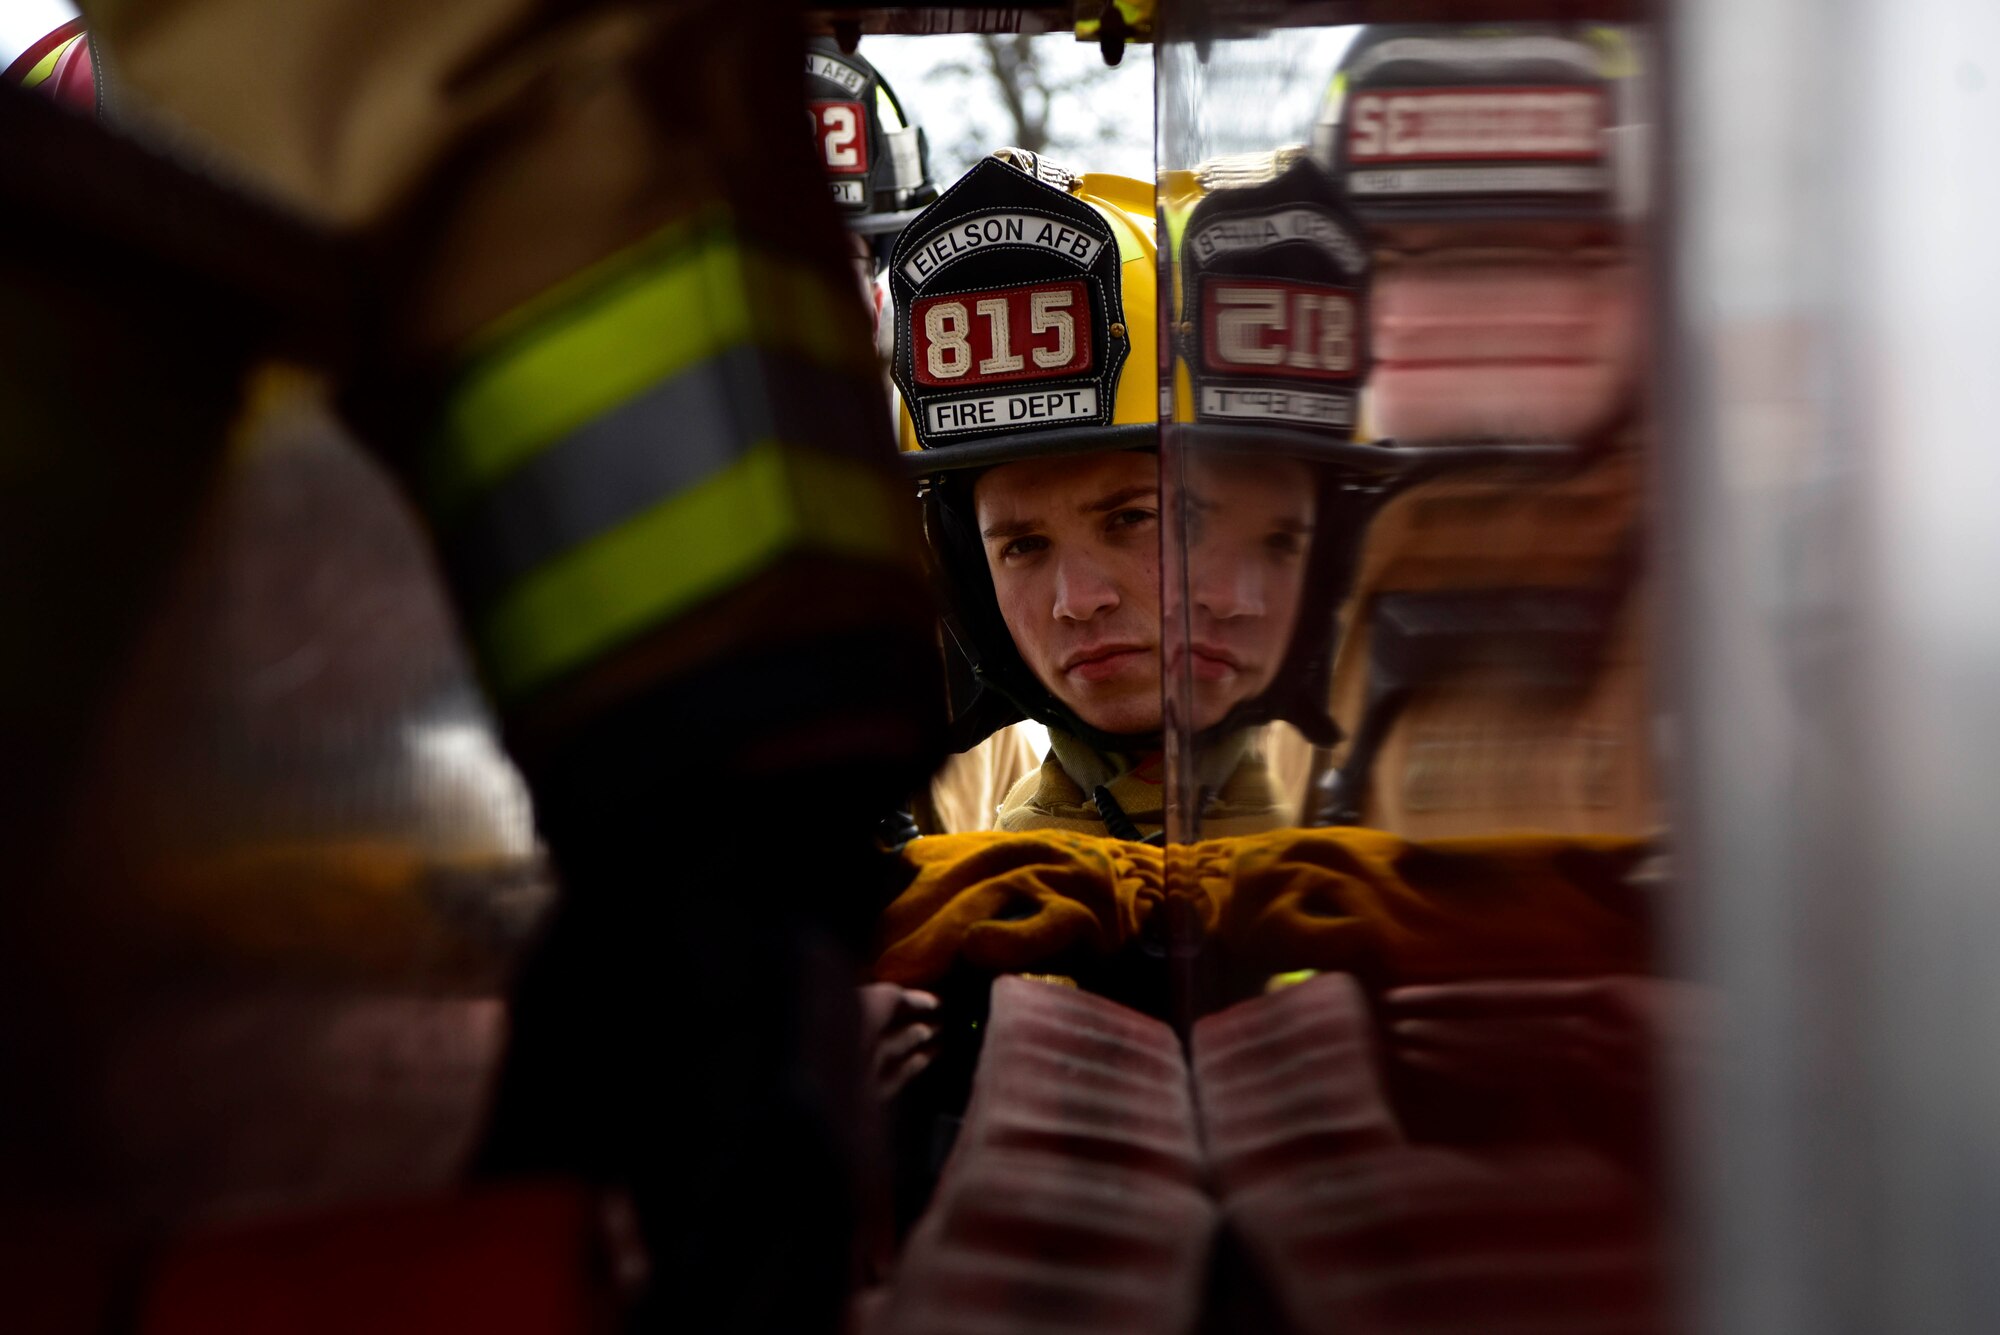 Airman 1st Class Taylor Beard, a 354th Civil Engineer Squadron firefighter, loads a hose onto a fire truck during a training exercise on Eielson Air Force Base, Alaska, March 26, 2020. The Eielson fire department is unique because one day they are responding to a wildfire and the next they are rescuing someone who is suffering from cold weather exposure. (U.S. Air Force photo by Senior Airman Beaux Hebert)